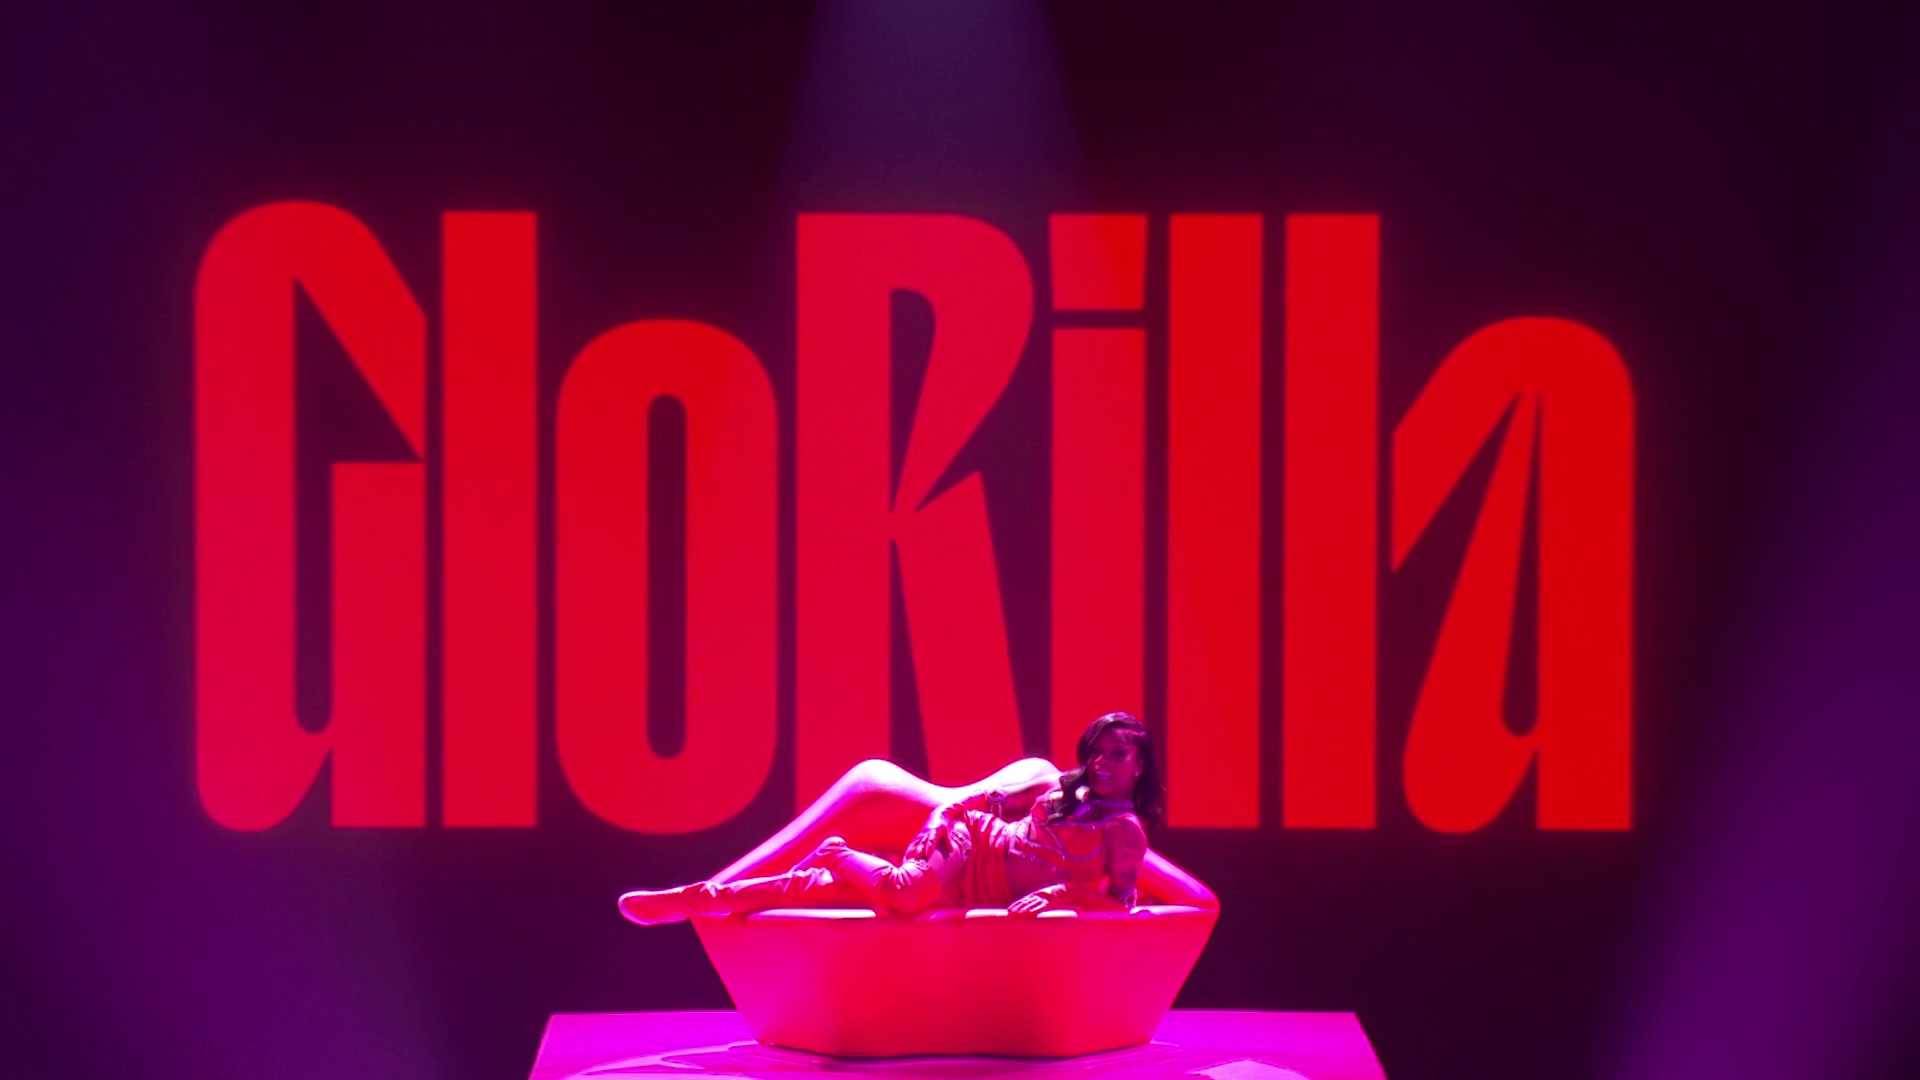 GloRilla hits the BET Awards 2023 stage to perform her track “Lick or Sum.”